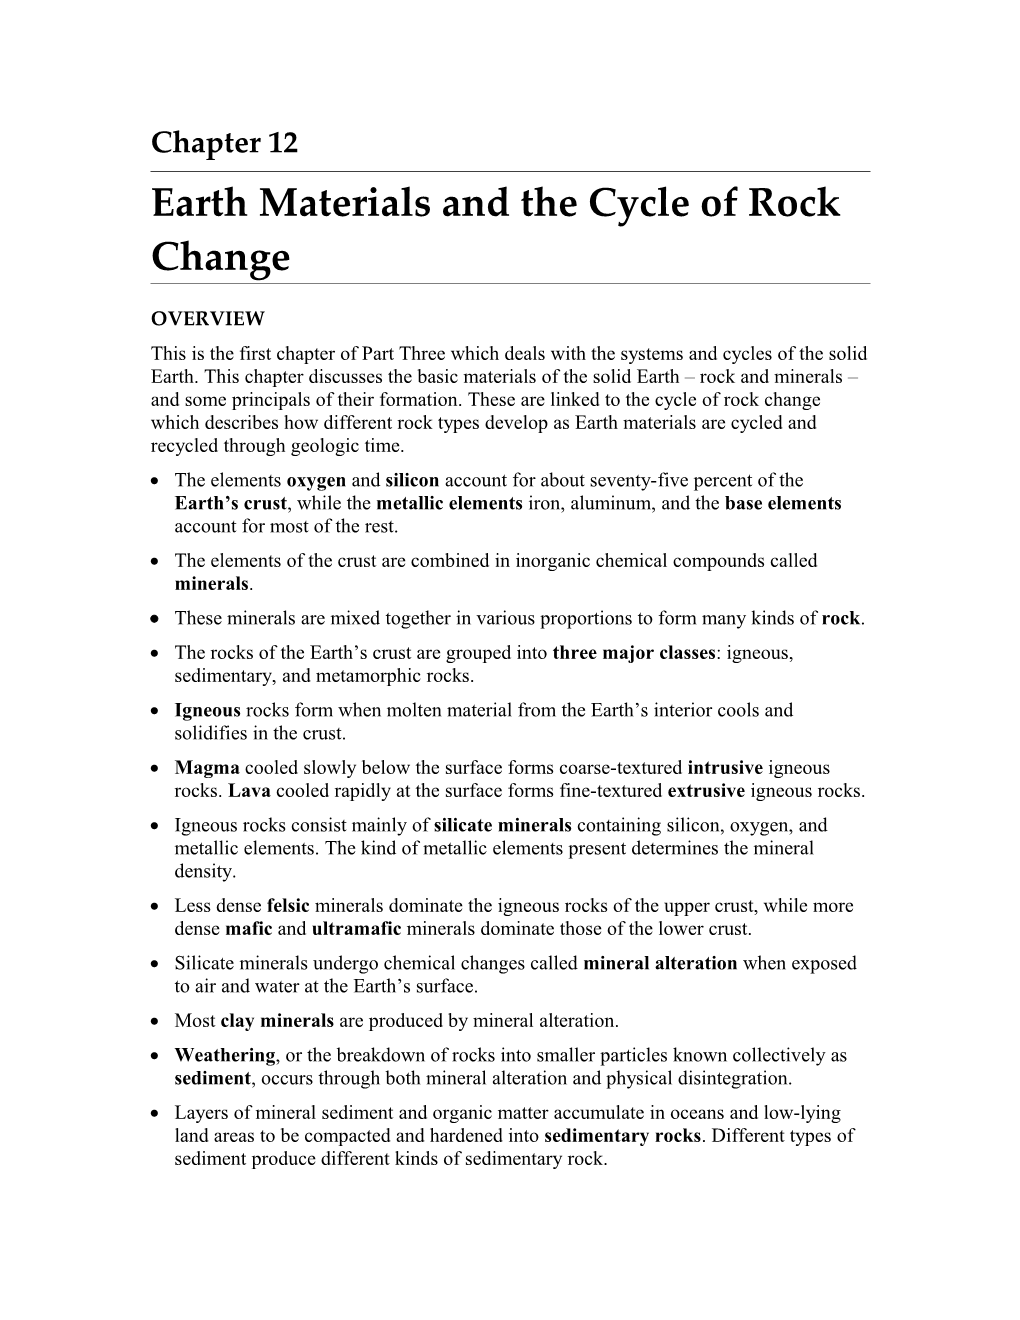 Earth Materials and the Cycle of Rock Change